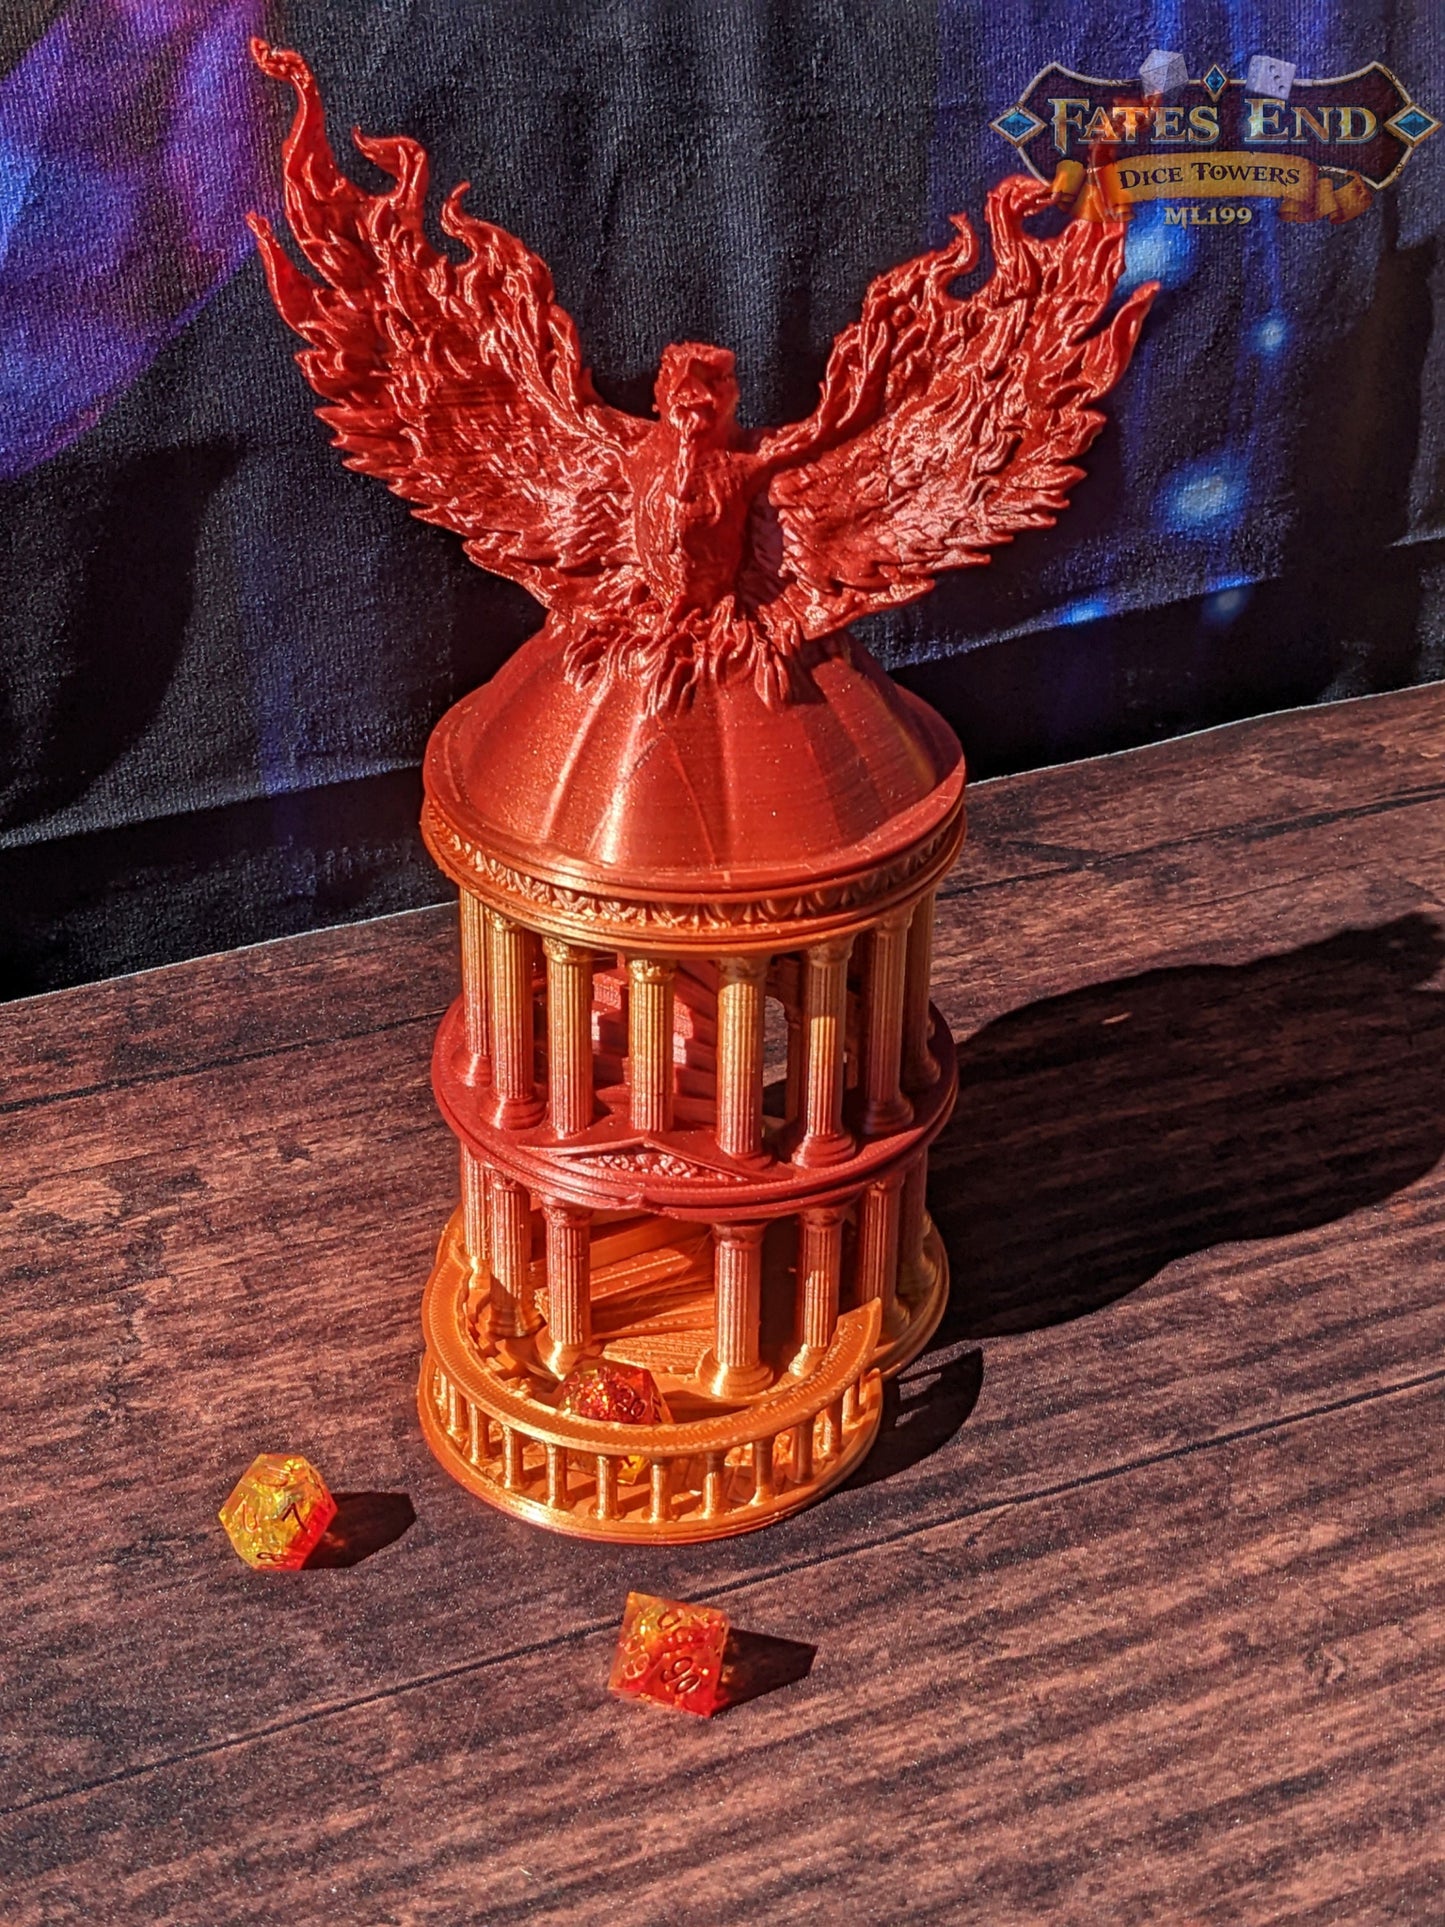 Phoenix 3D Printed Dice Tower - Fate's End Collection - Ignite Your Rolls with Flames of Rebirth and Soaring Resilience.